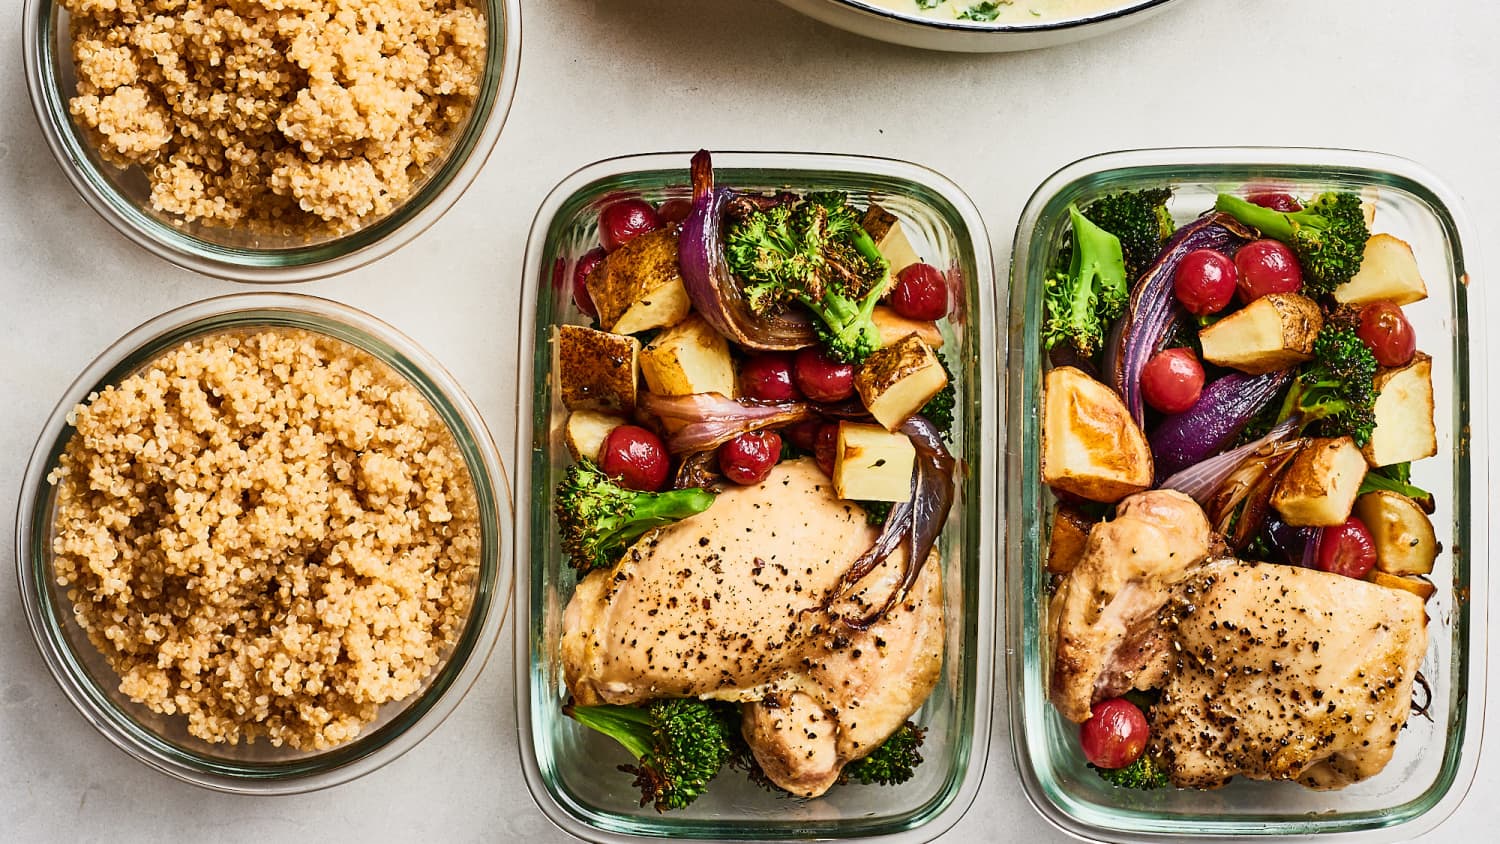 I Successfully Meal Prep Using These 12 Recipes, and Here's Why It Works